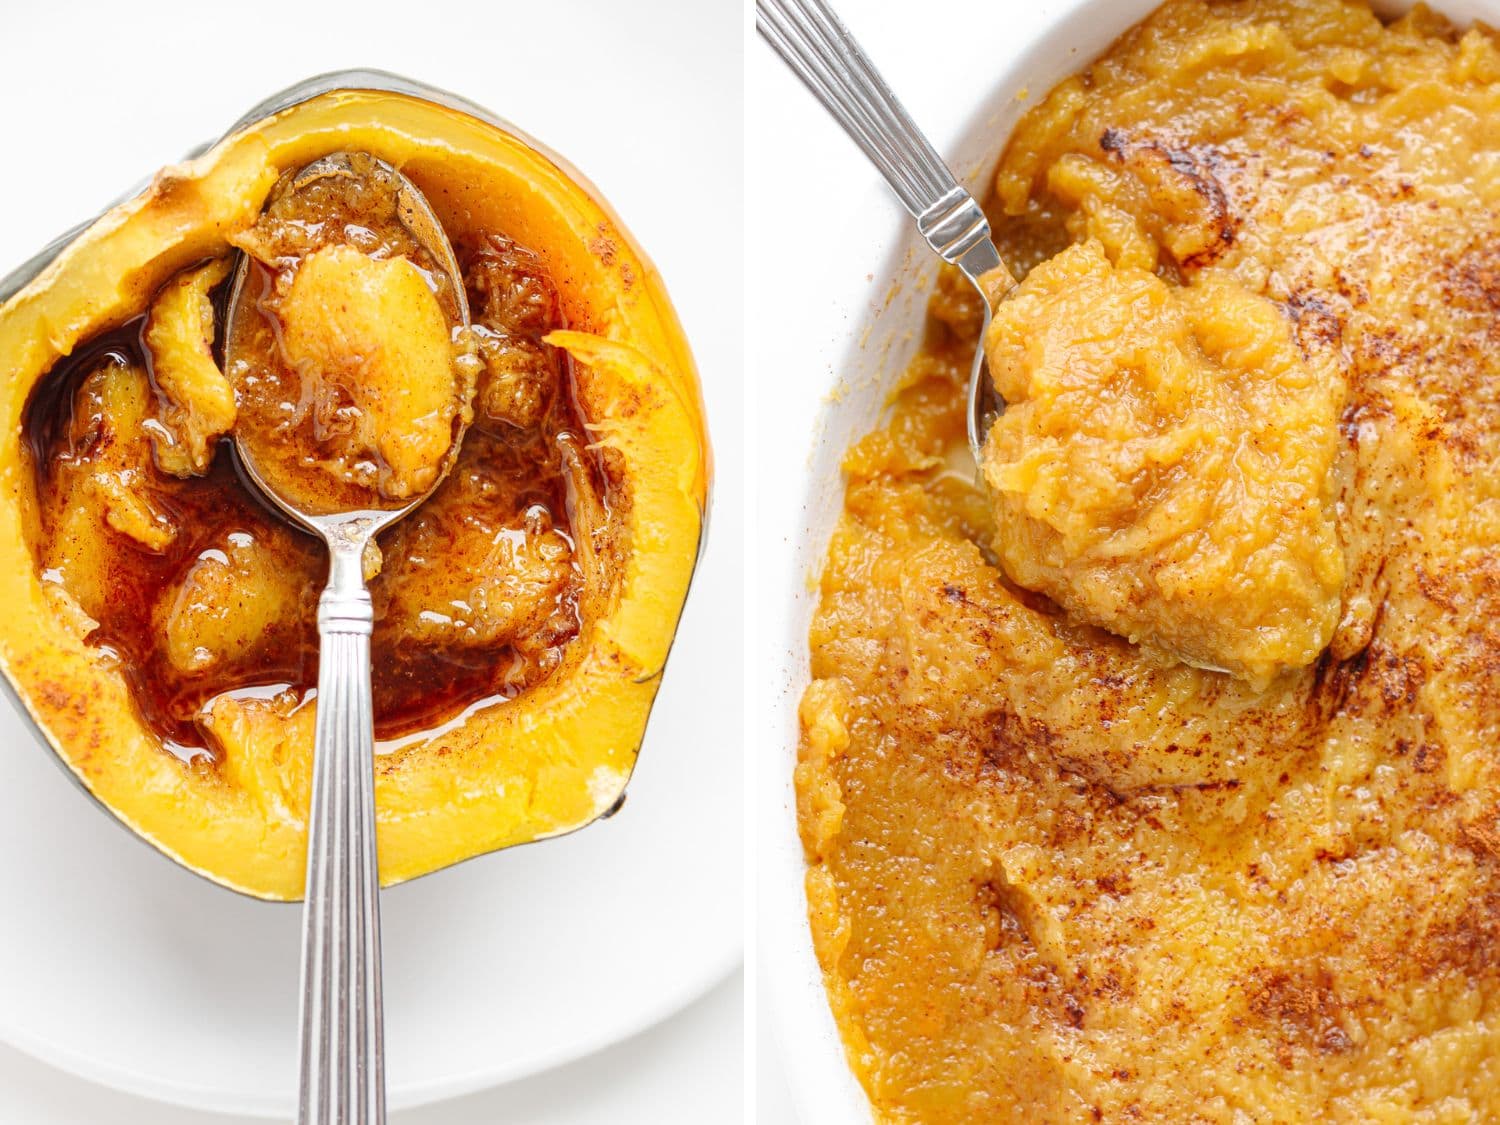 Cooked acorn squash half with a spoon next to a dish of mashed acorn squash.